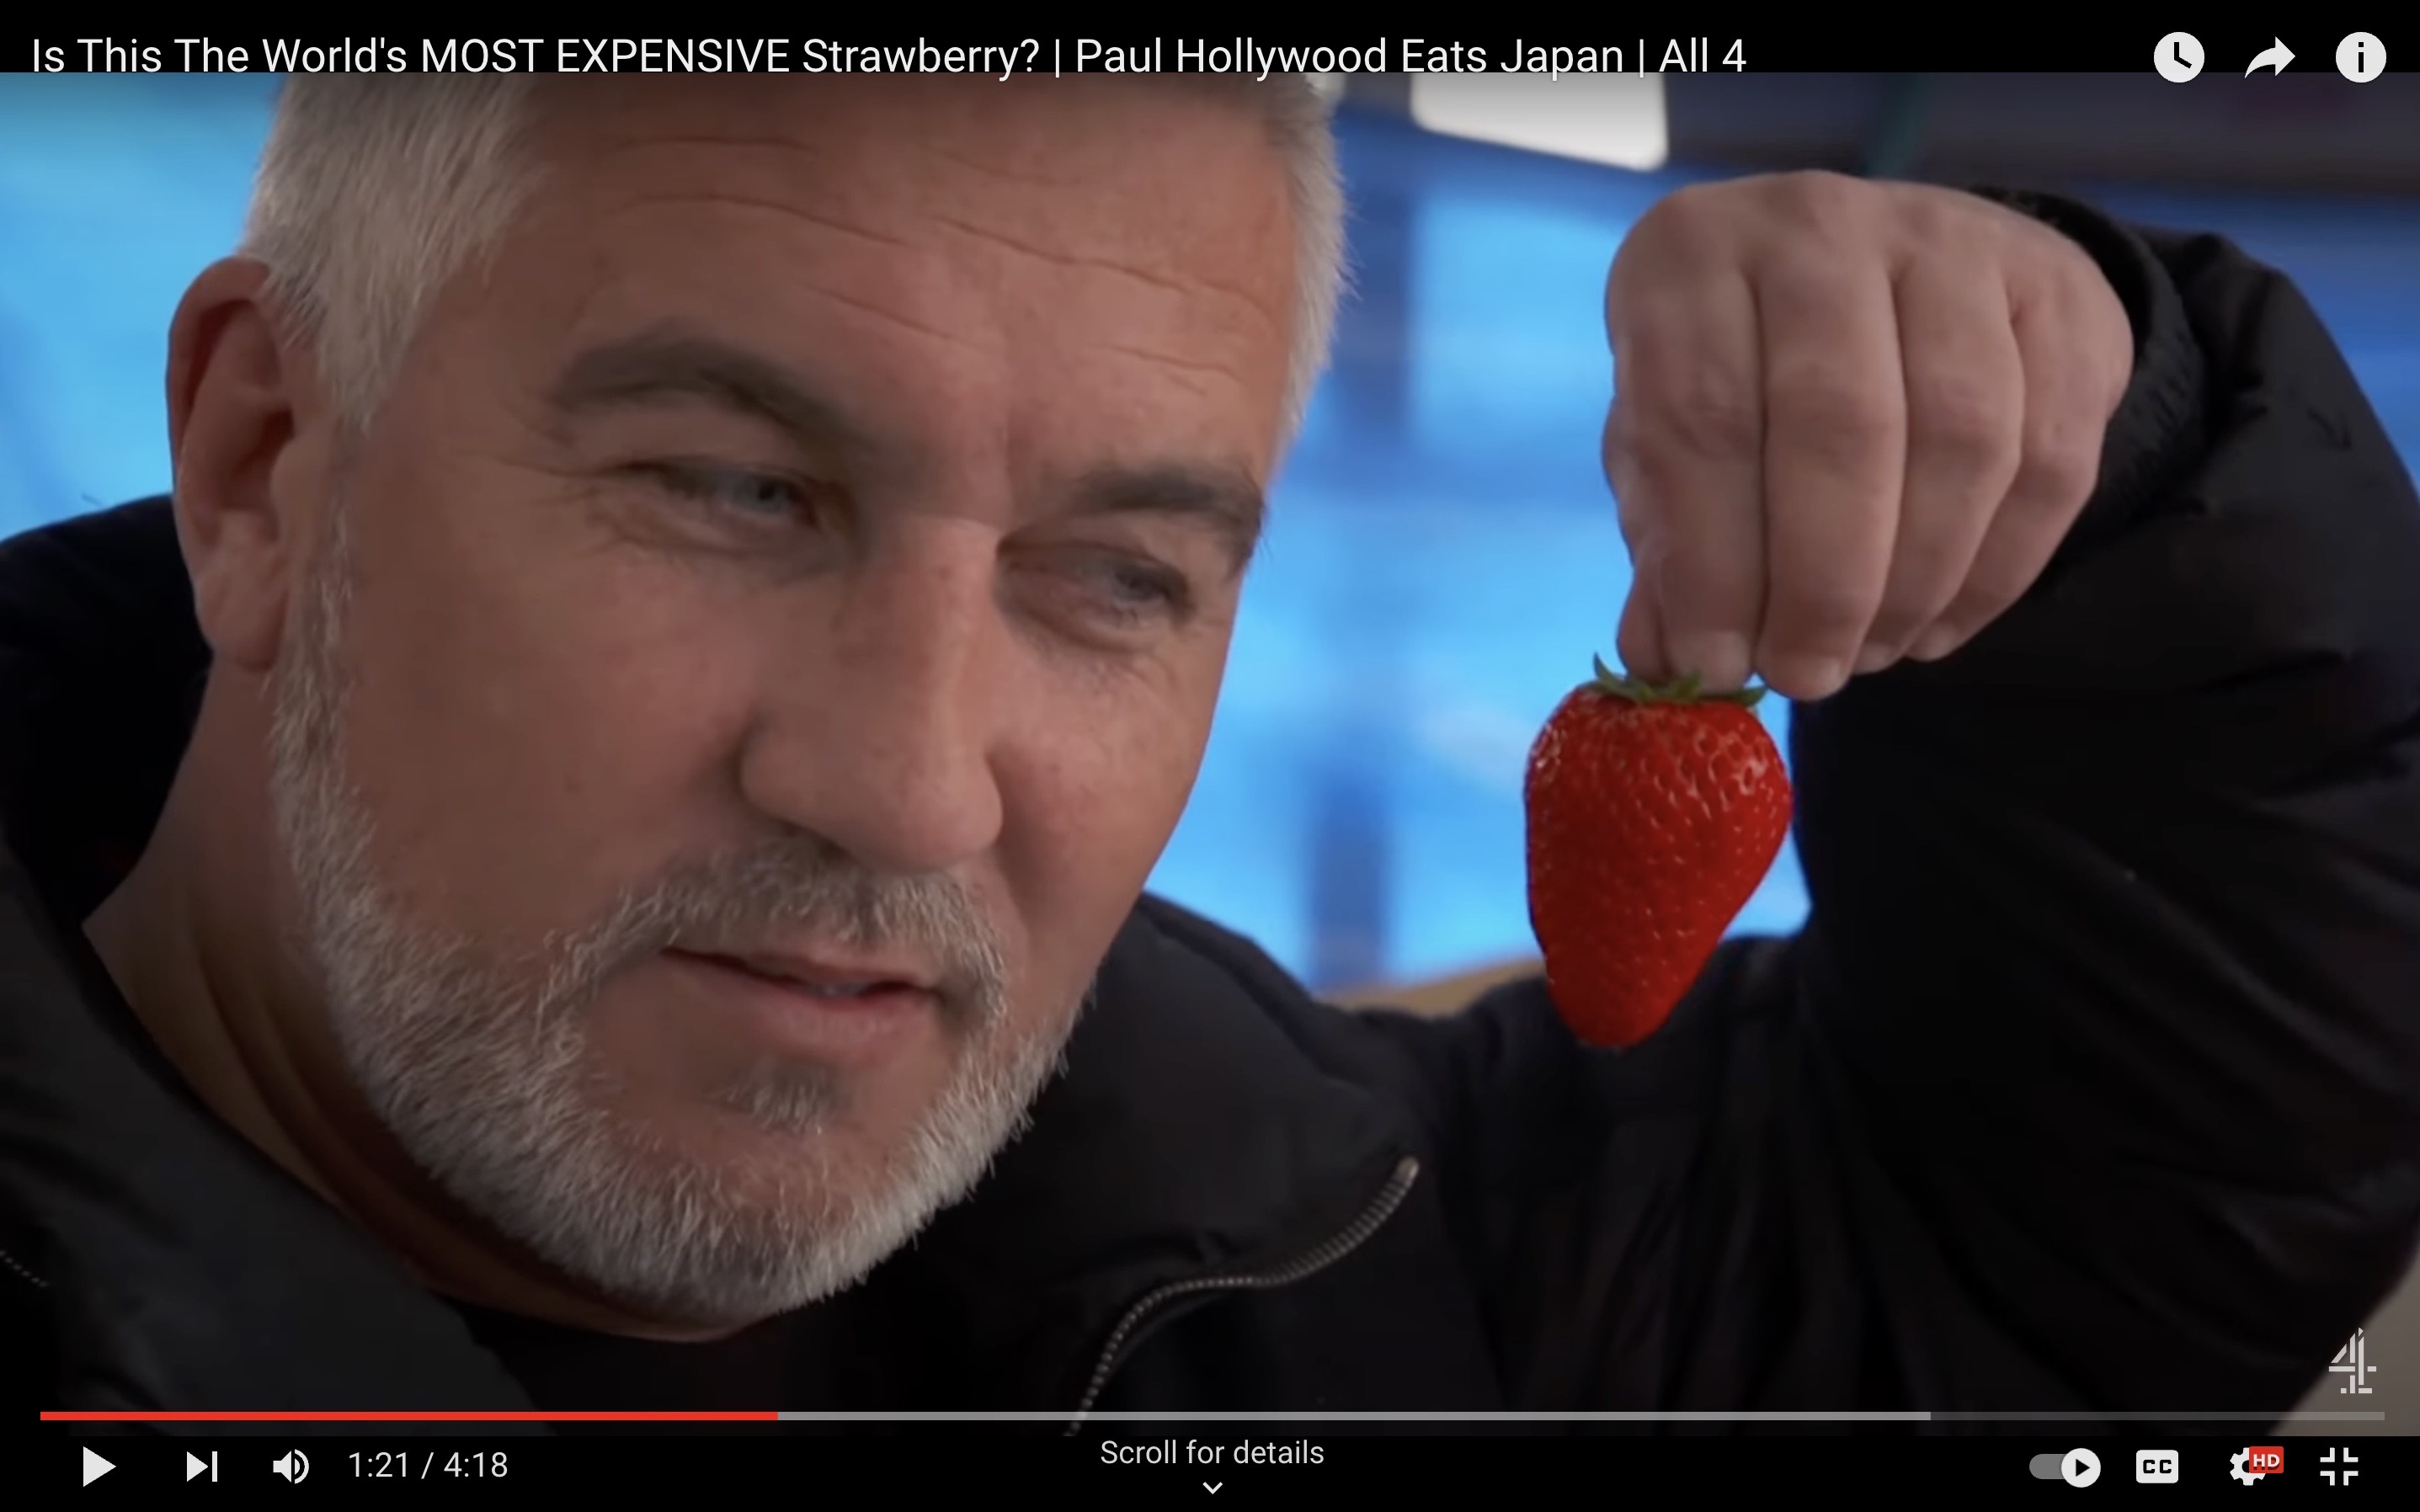 Chef Paul Hollywood eyes what could be the priciest strawberry in the world.